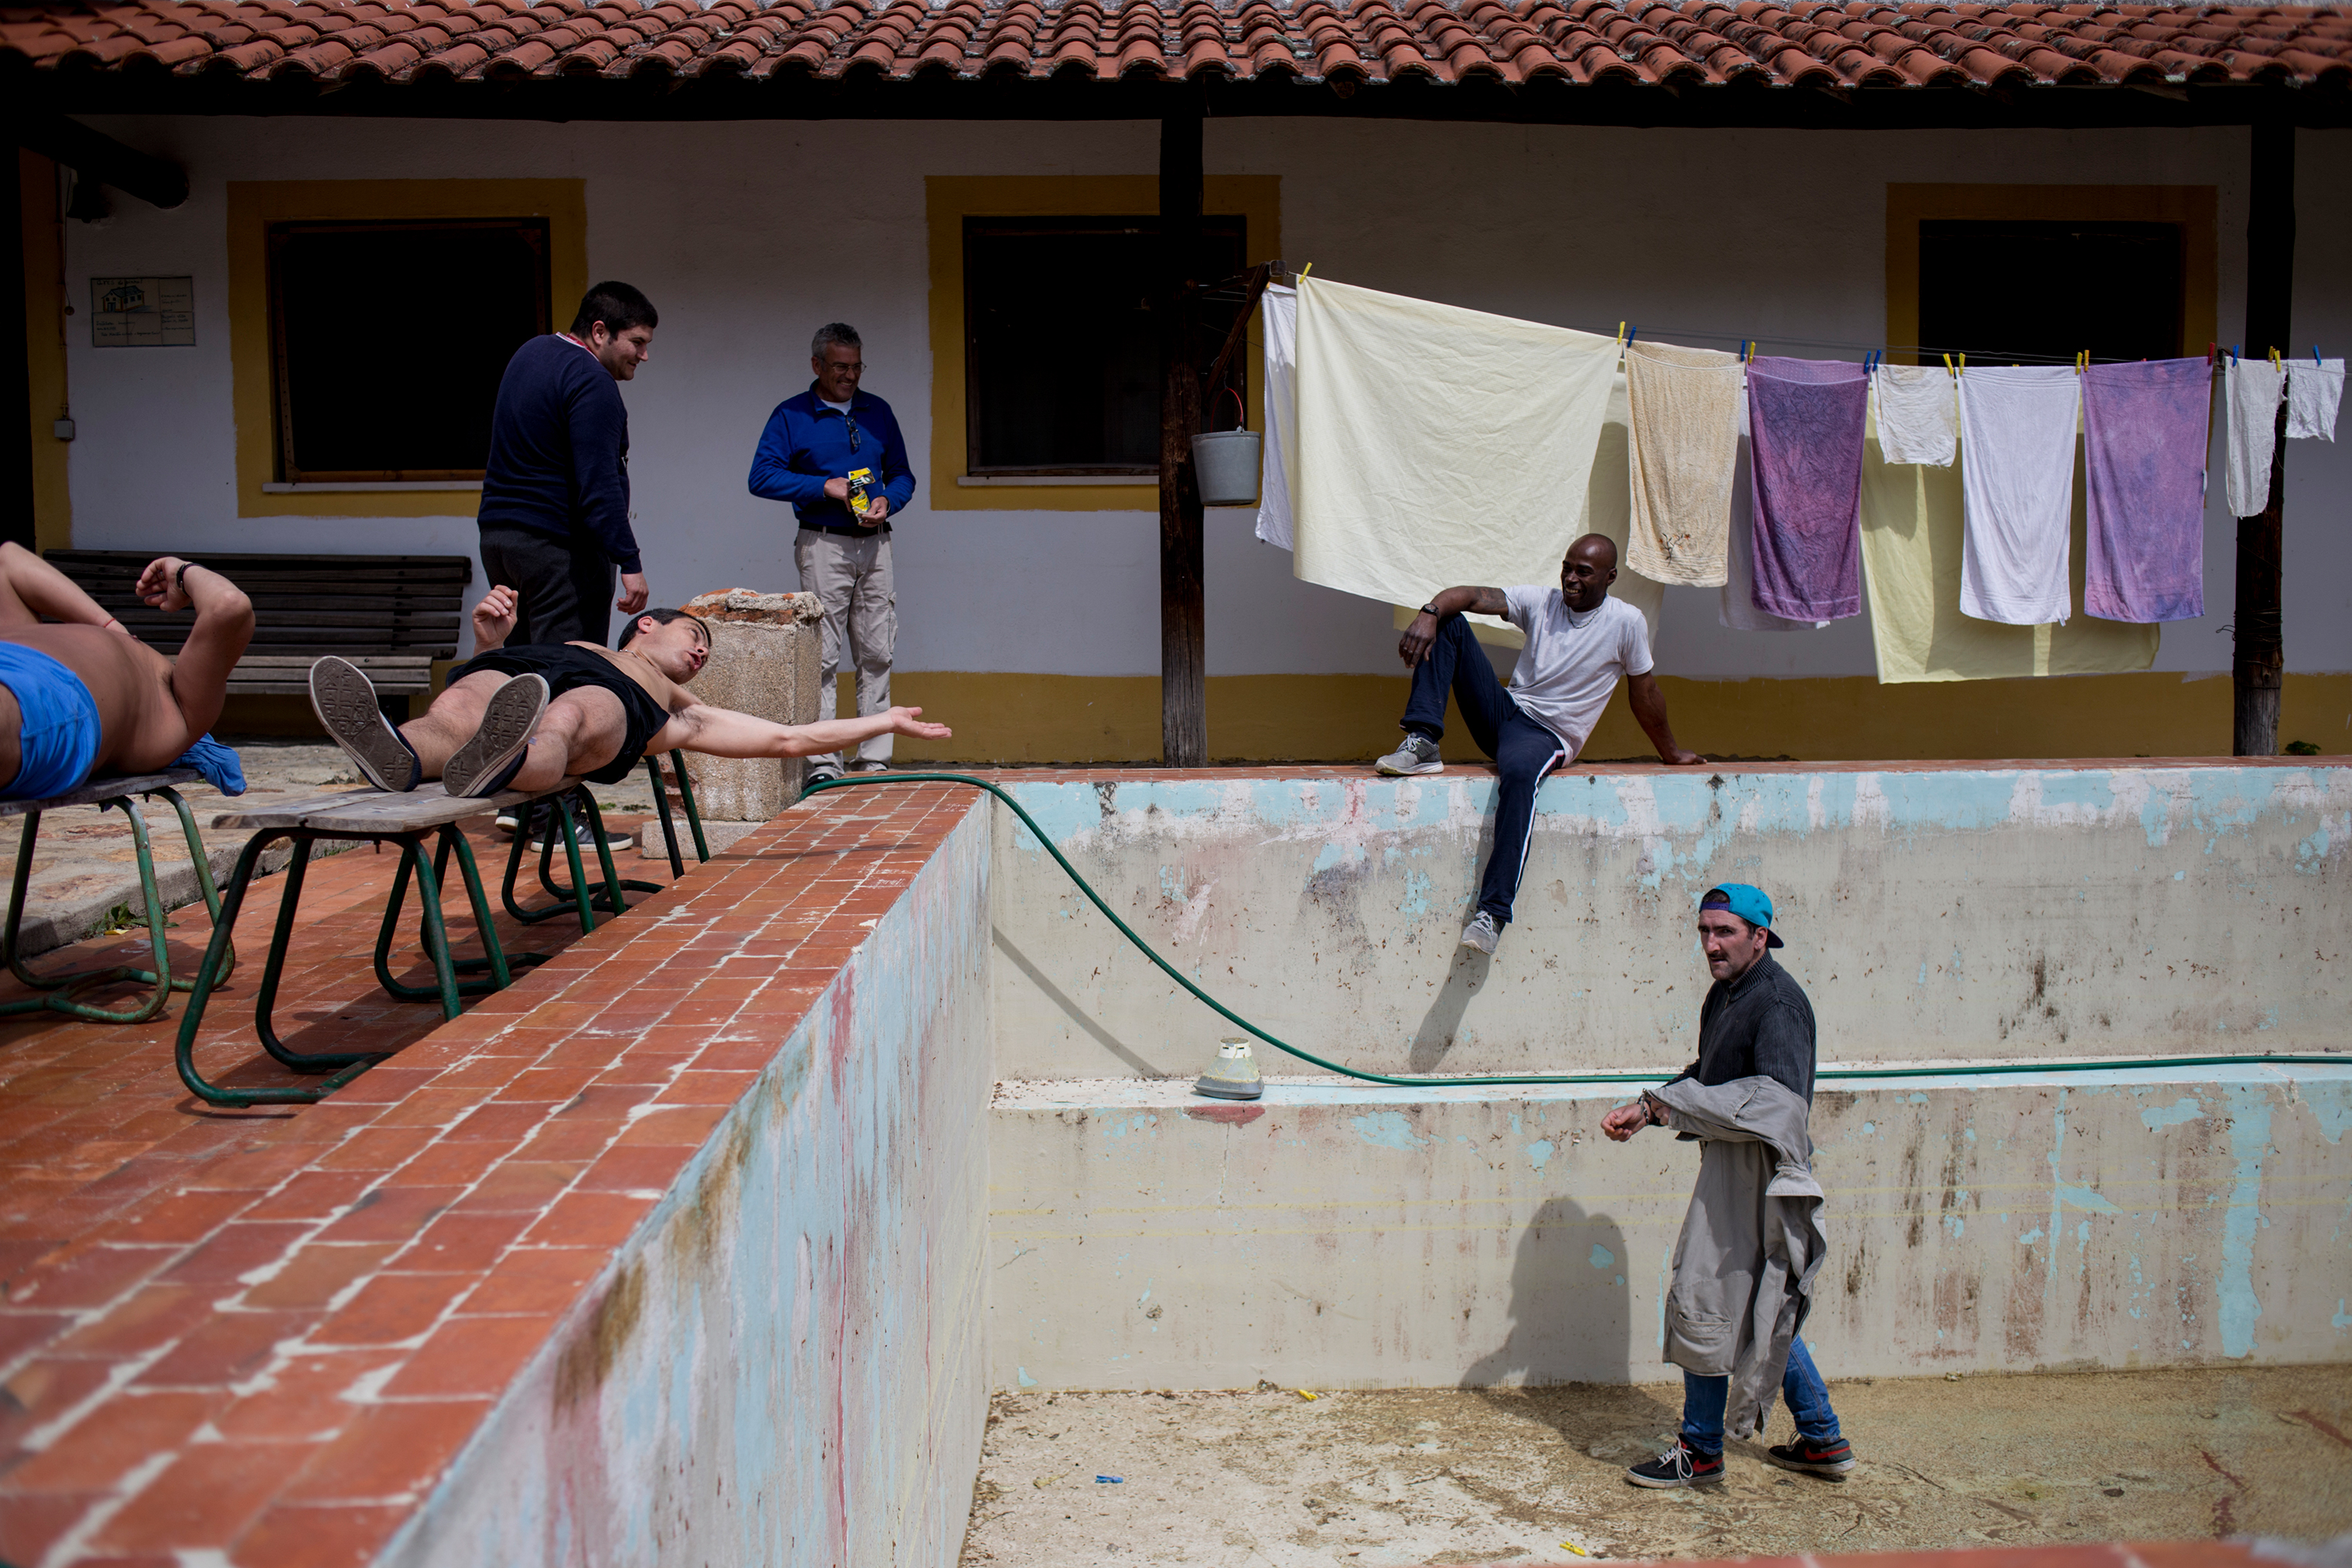 Carlos (right), steps into the swimming pool, which is being renovated, while other patients at Ares do Pinhal Therapeutic Community look on, March 30, 2017. (Gonçalo Fonseca)